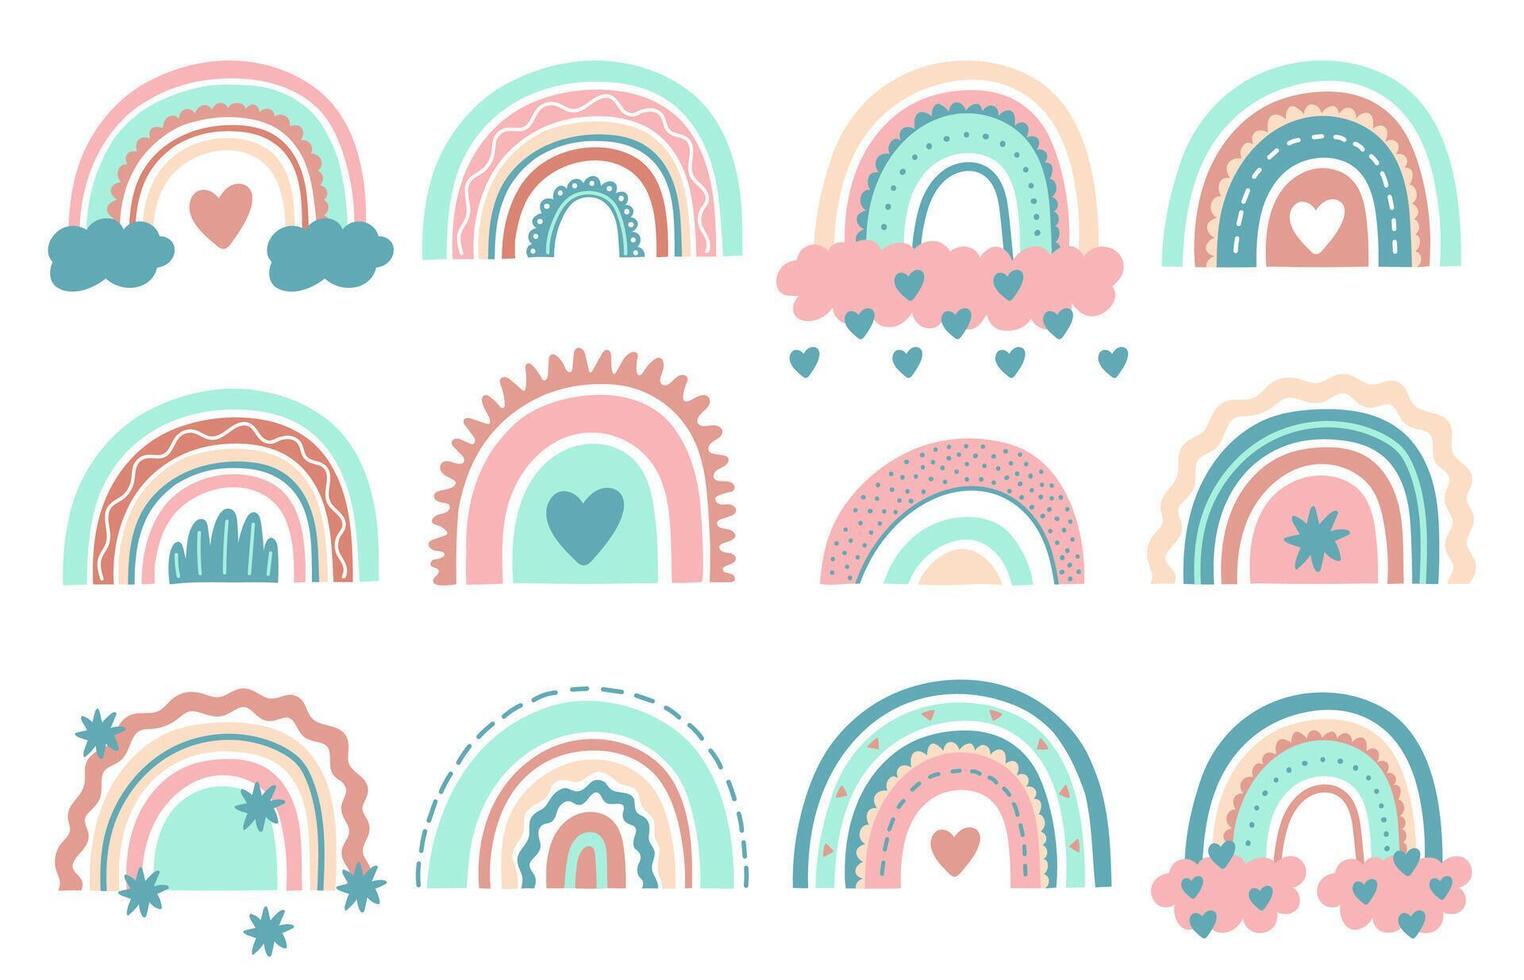 Cute rainbows. Doodle nursery rainbow with clouds, childish scandinavian elements for wrapping or fabric. Lovely rainbows vector illustrations